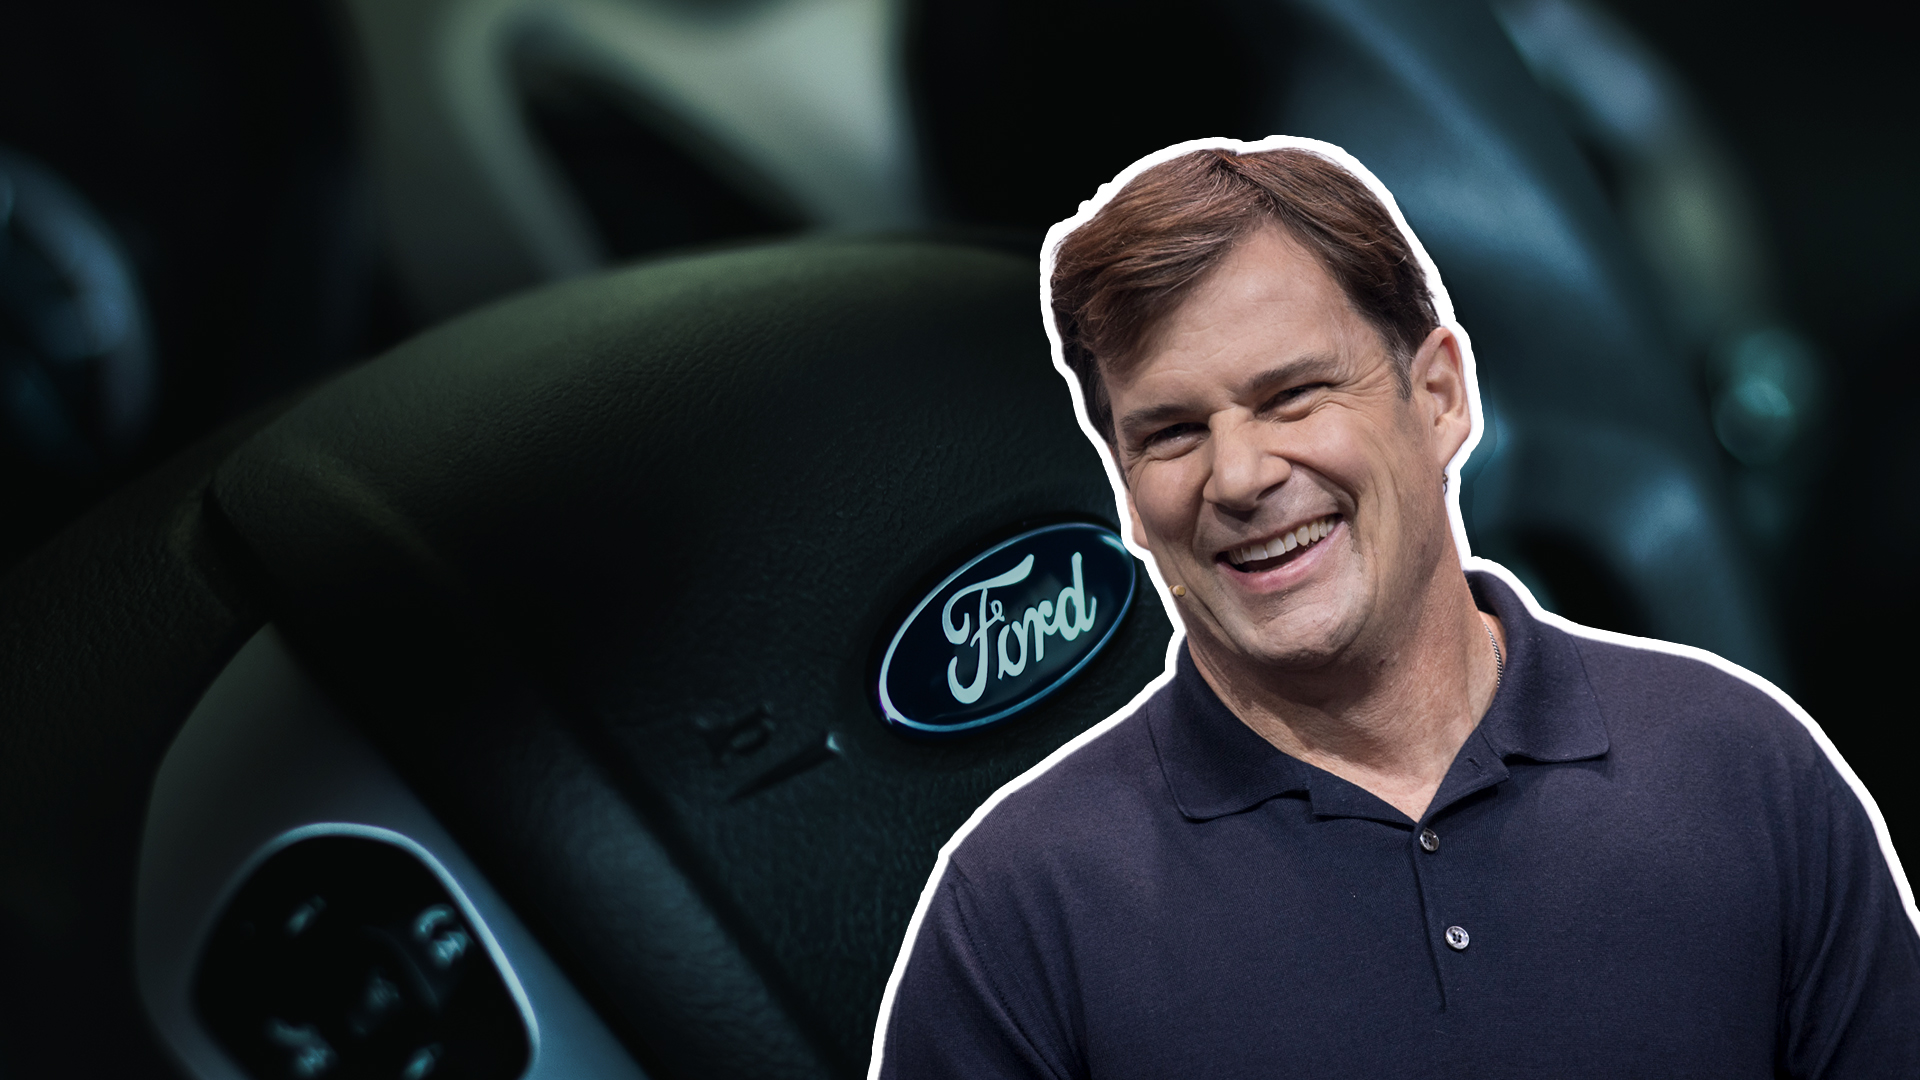 CEO Jim Farley reaffirmed Ford's commitment to continue supporting third-party apps such as Apple CarPlay and Android Auto in its vehicles.